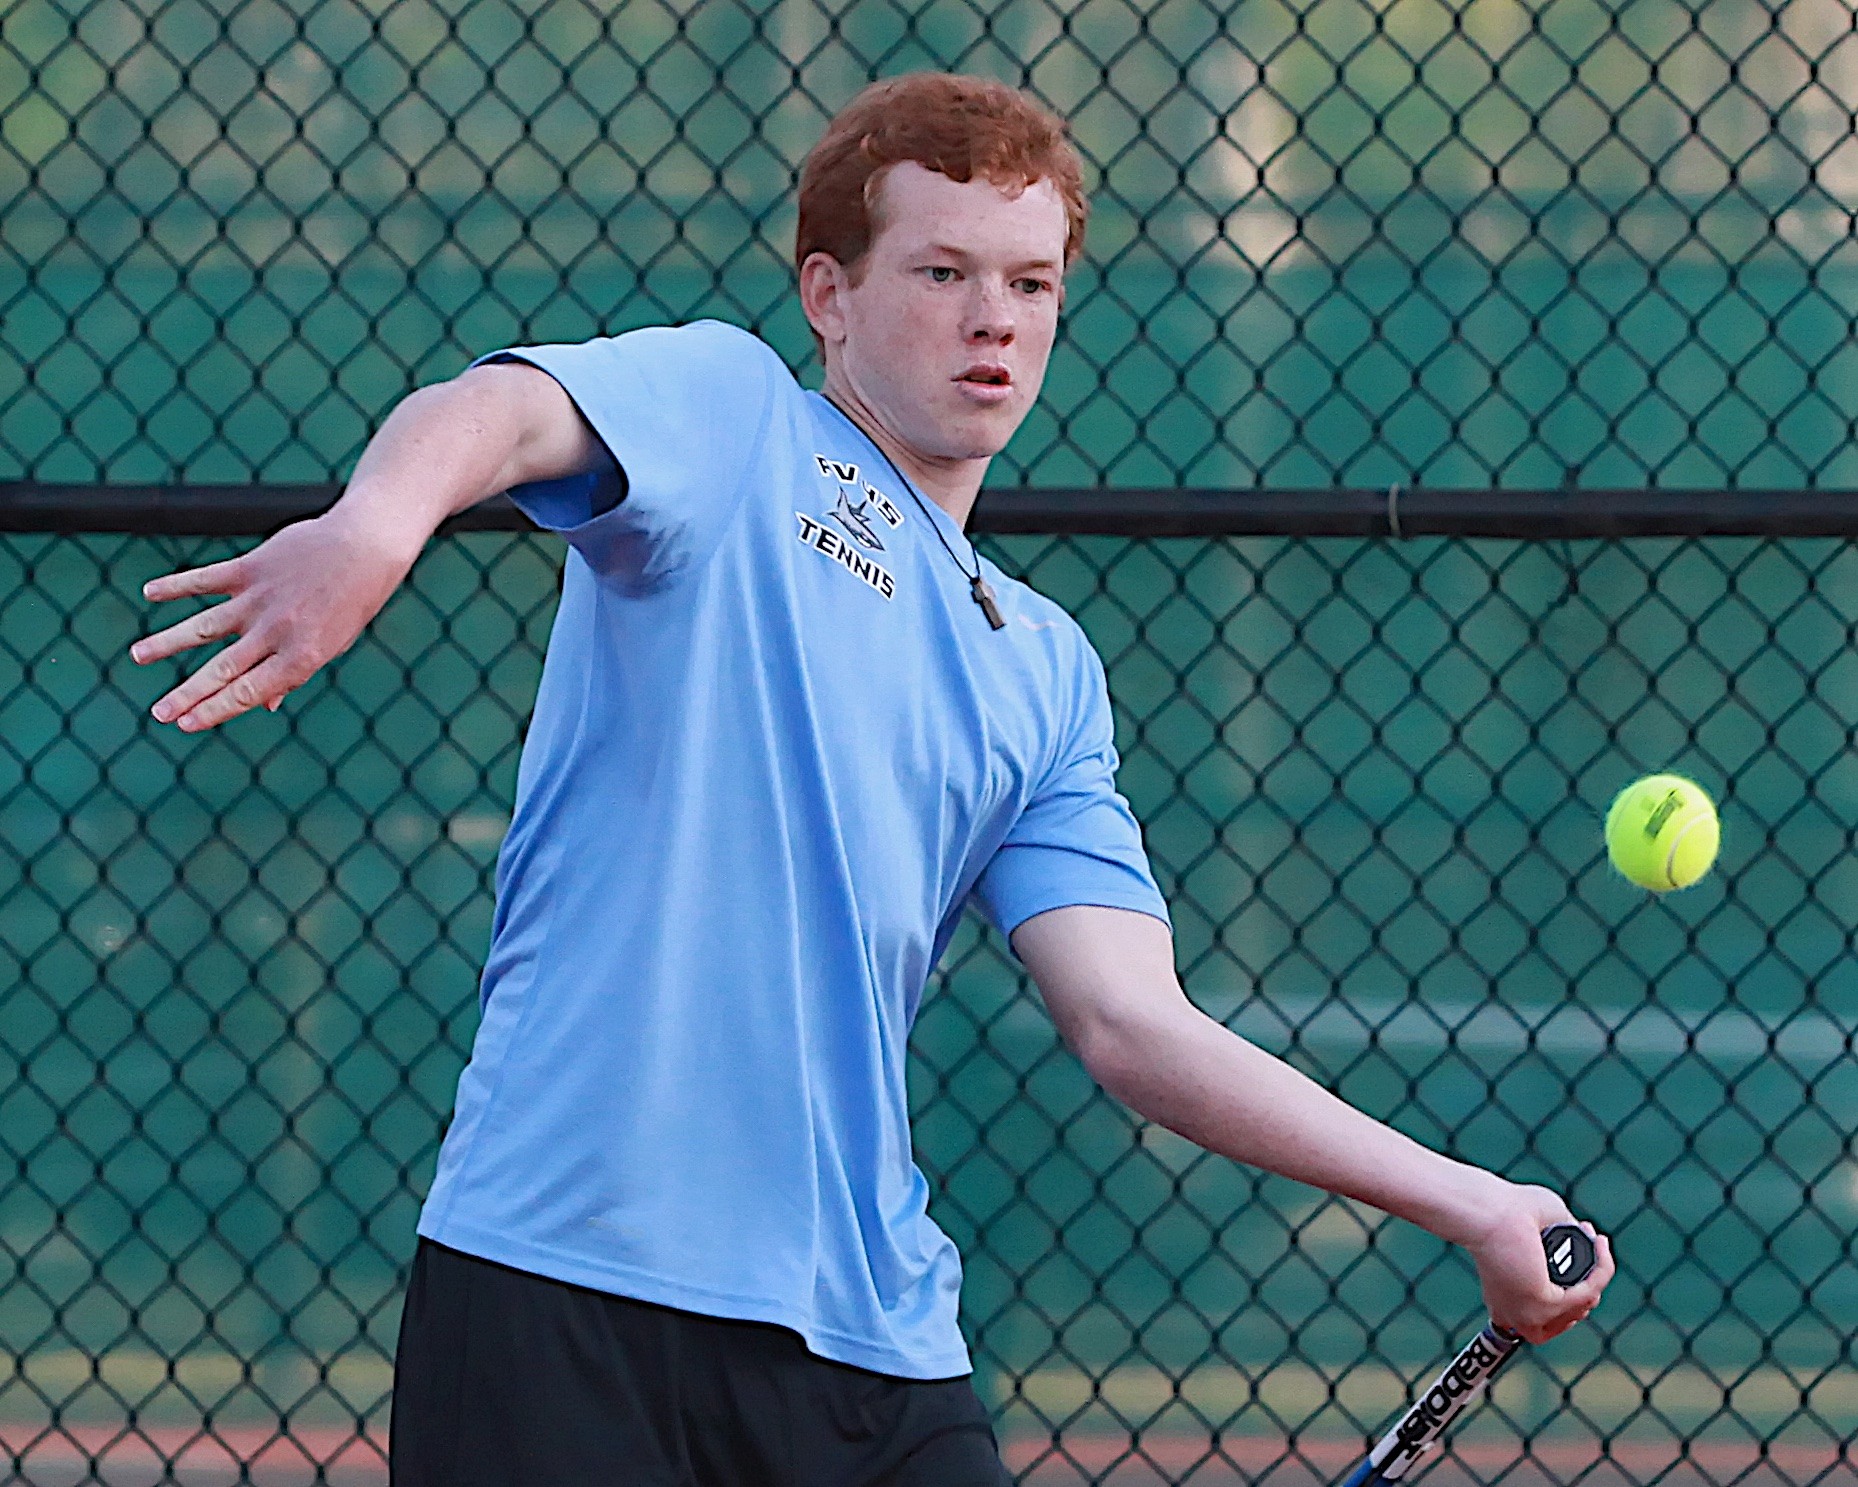 Ponte Vedra’s Eric Gravelle helped lead the Sharks to the district title with a 6-1, 6-2 win over Ridgeview.